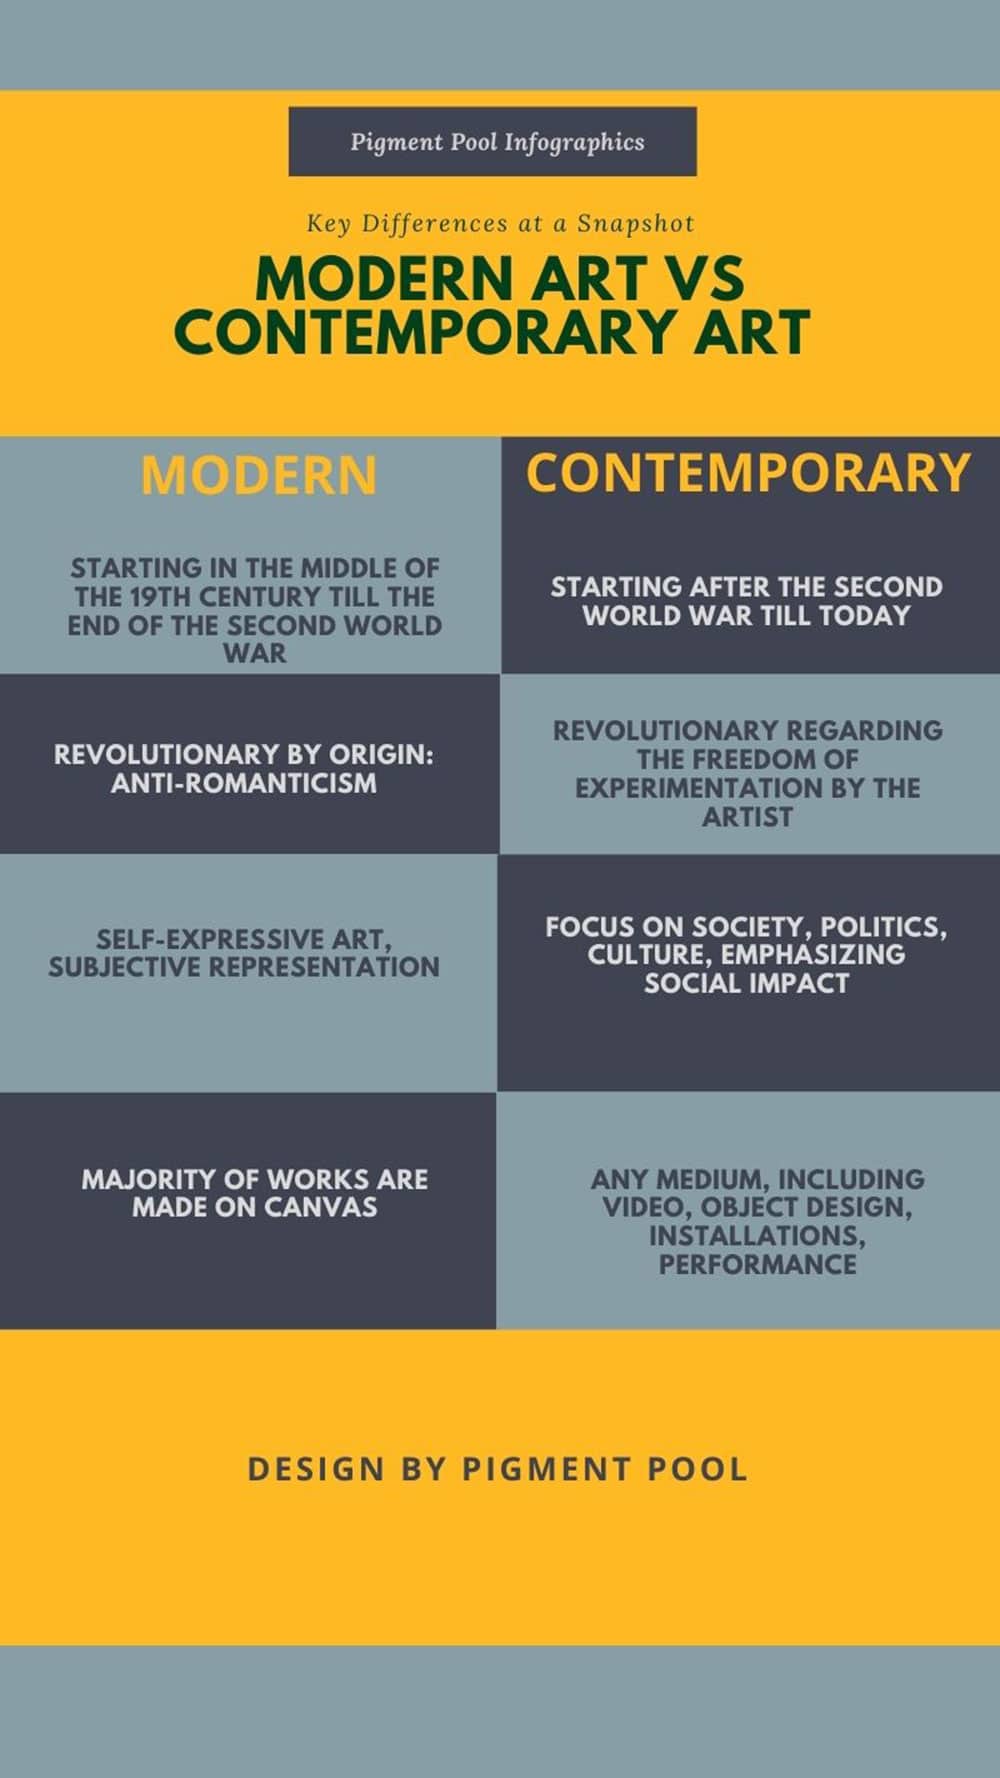 Modern and Contemporary Art – What is the Difference? - Pigment Pool